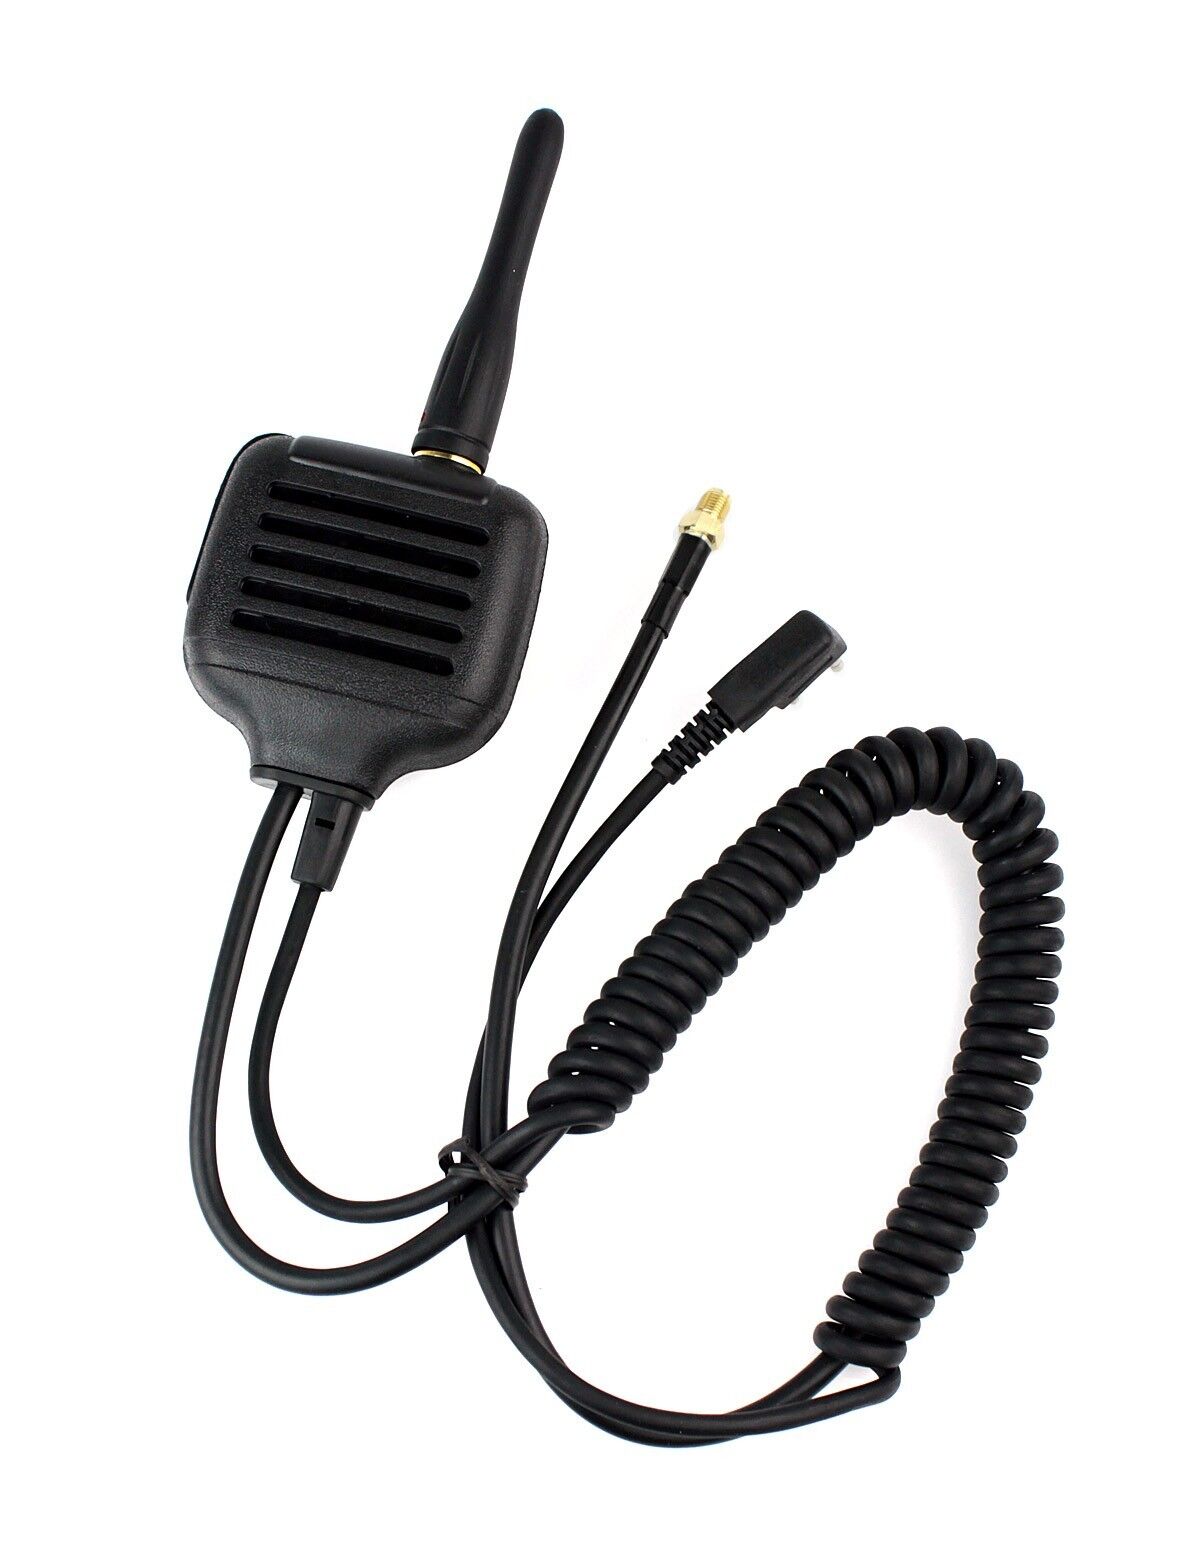 New Shoulder Speaker Mic with antenna for BAOFENG UV5R 888S KENWOOD WOUXUN HYT